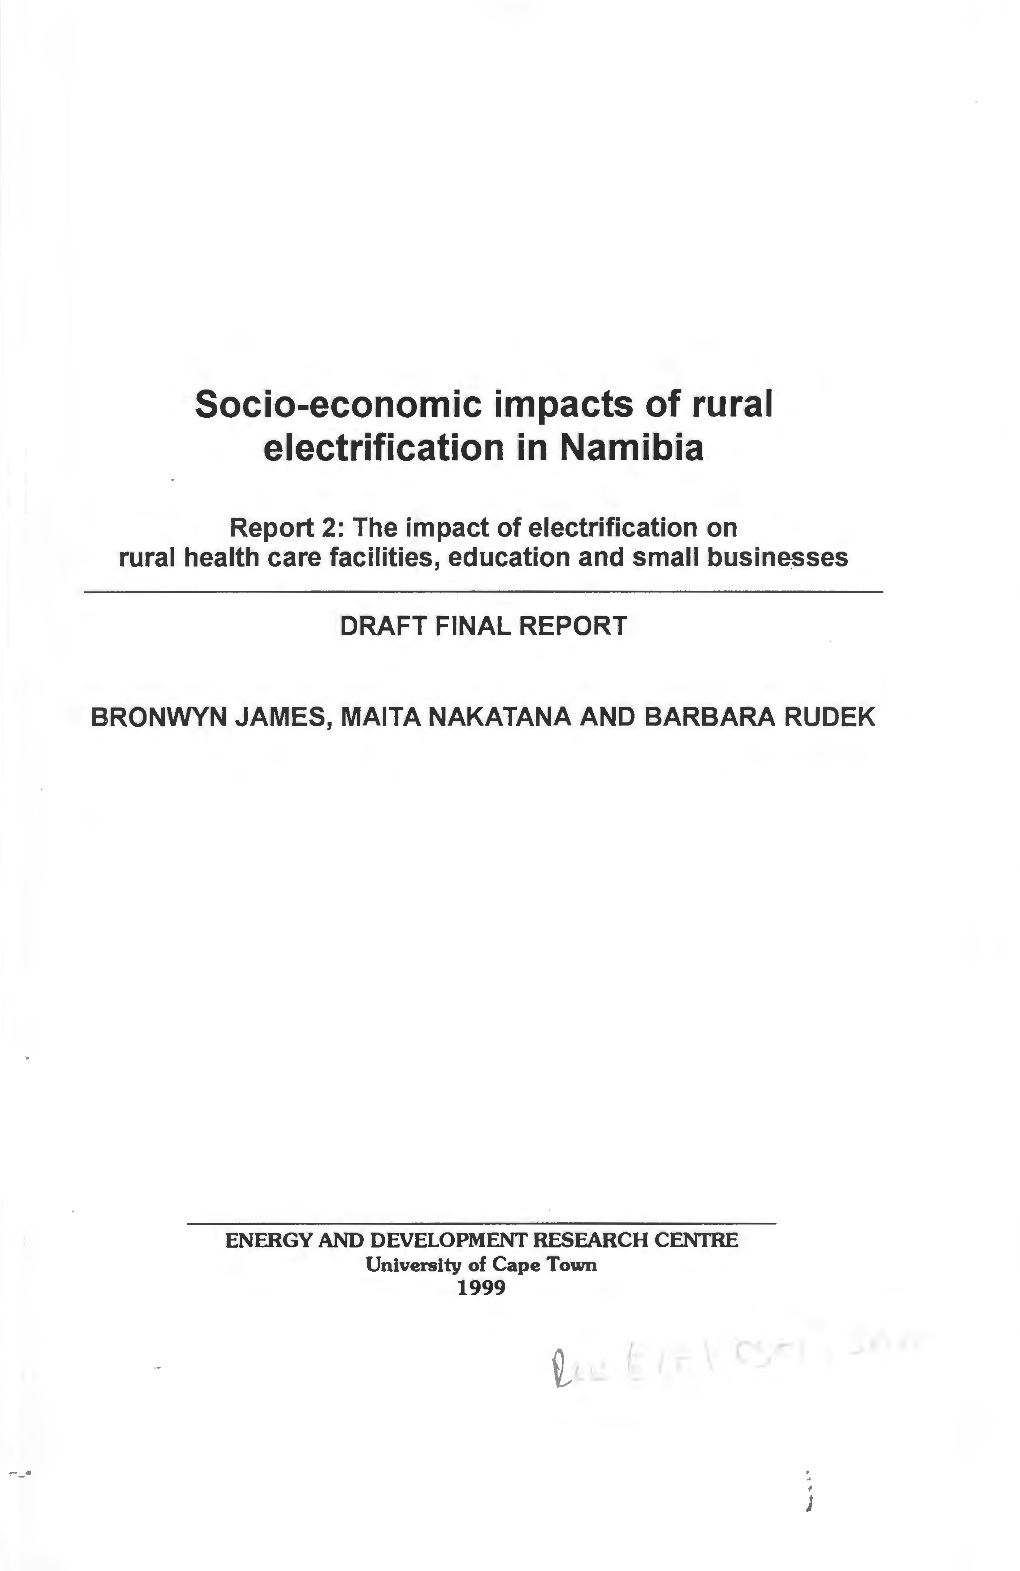 Socio-Economic Impacts of Rural Electrification in Namibia